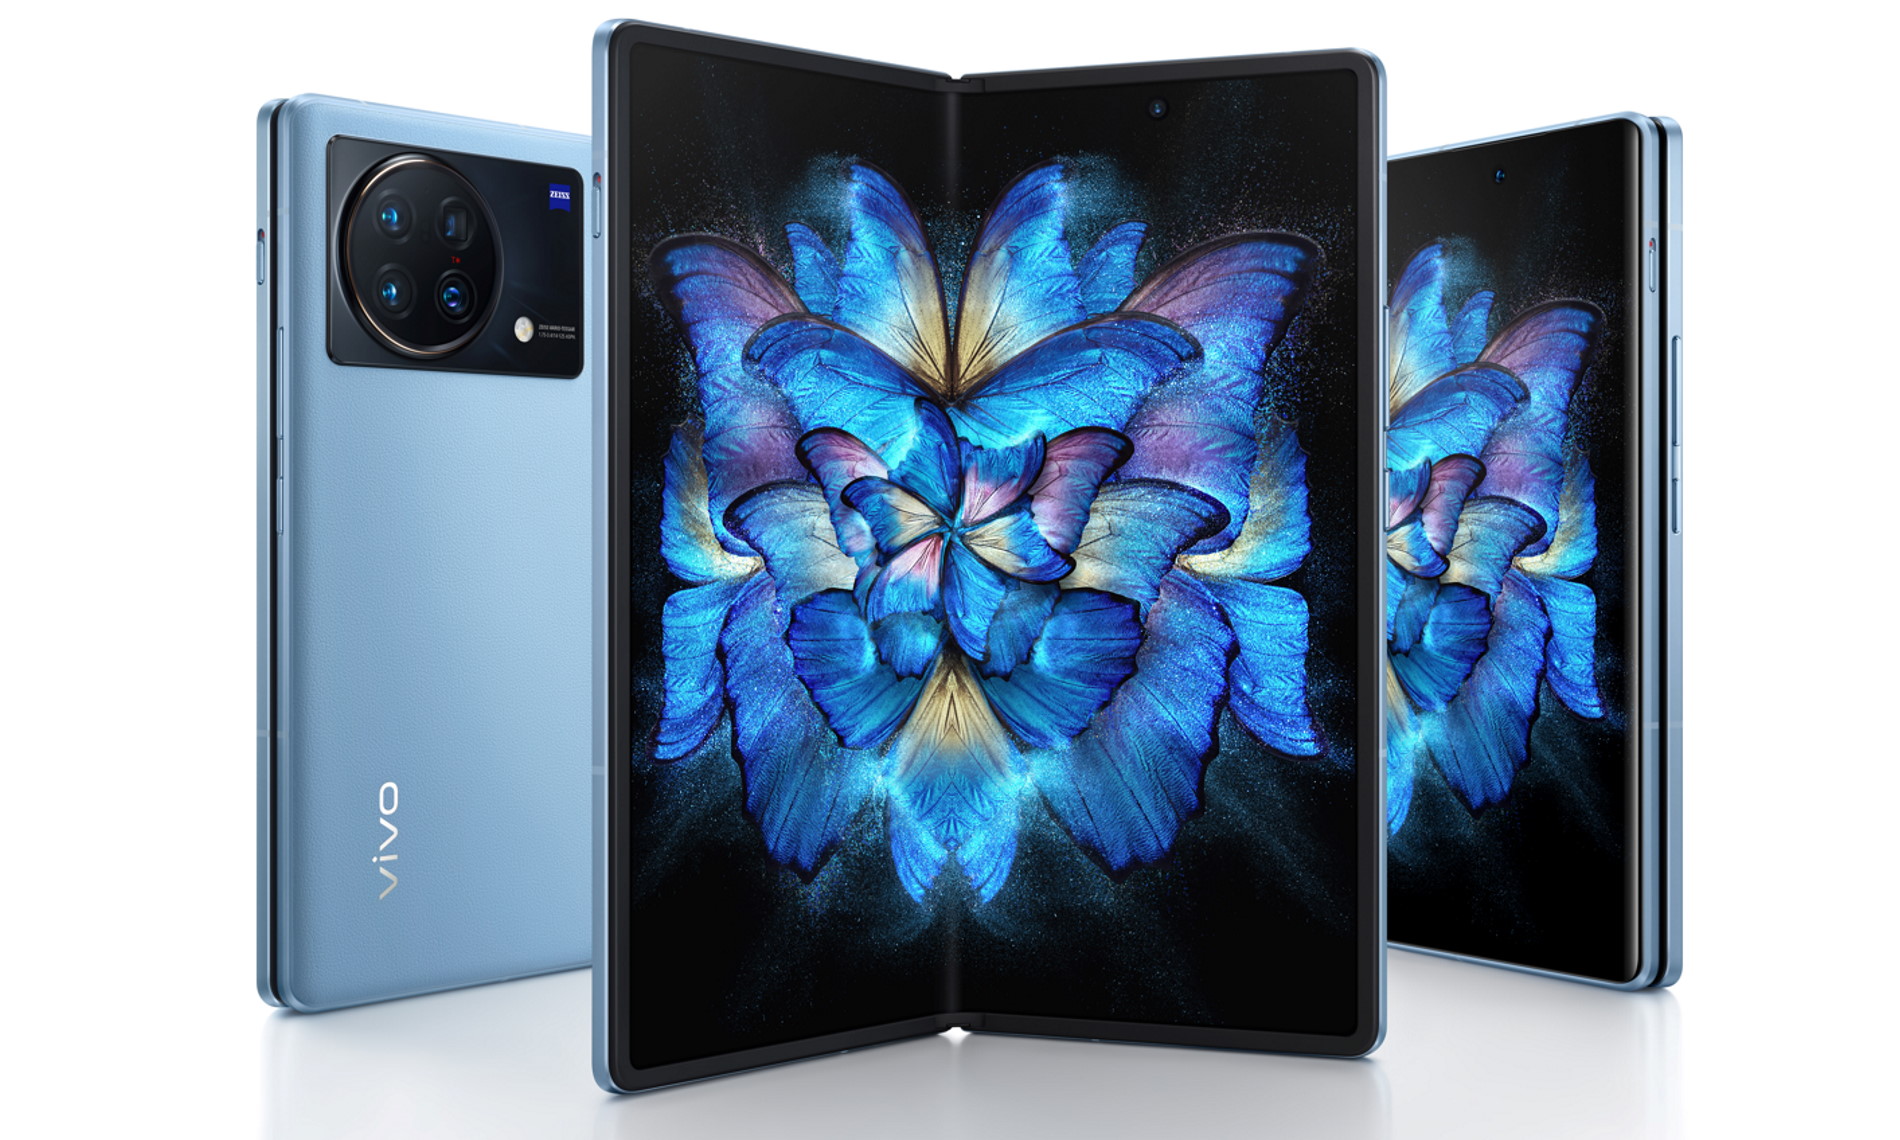 vivo launches its first foldable smartphone, the vivo X Fold